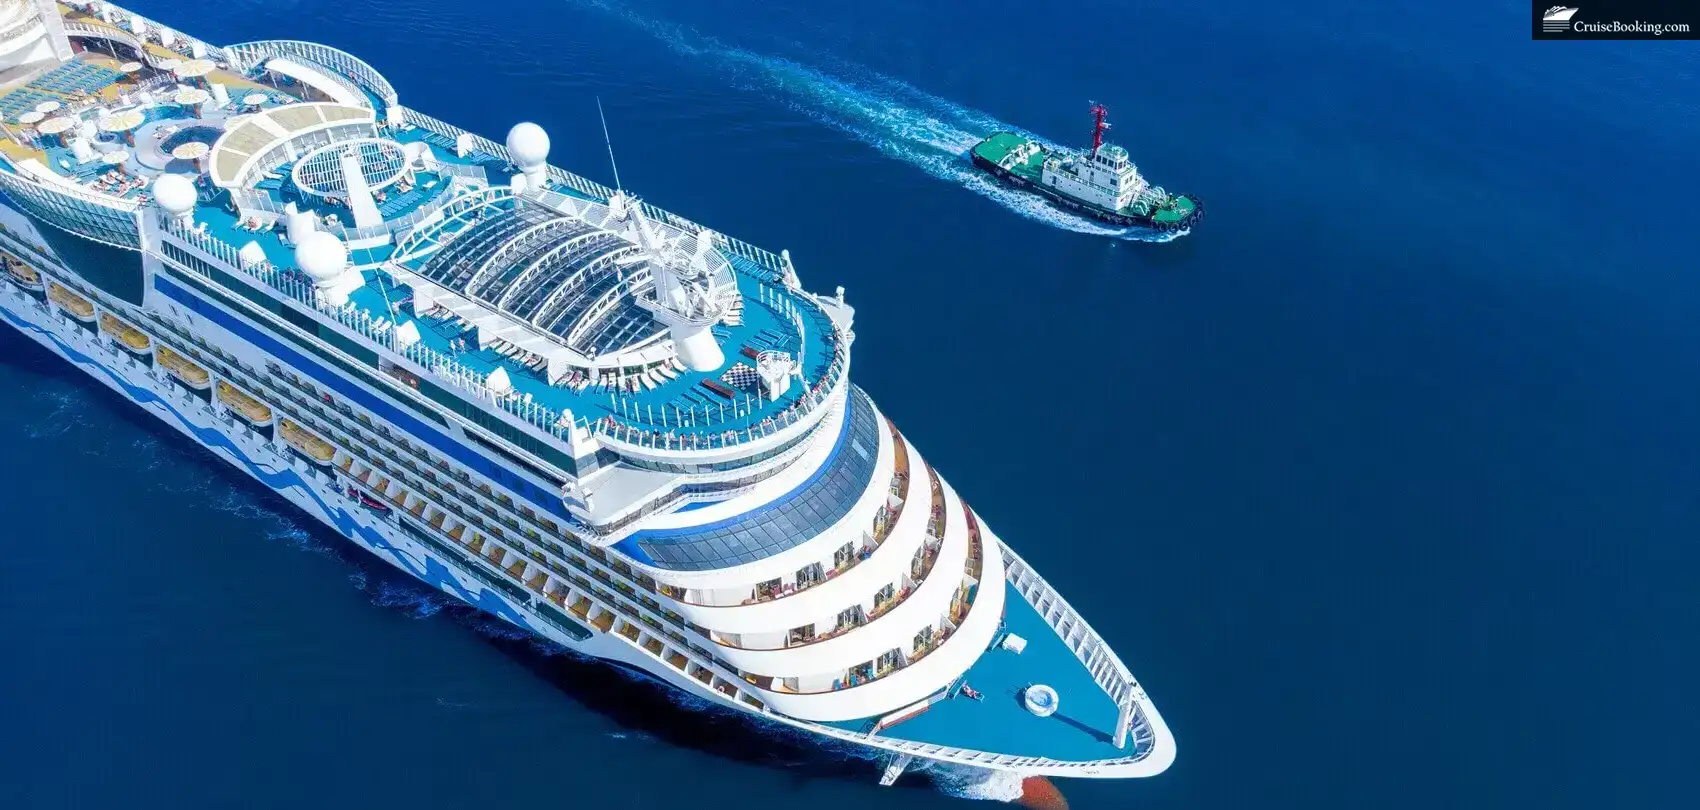 What Are The Options For Luxury Cruises?